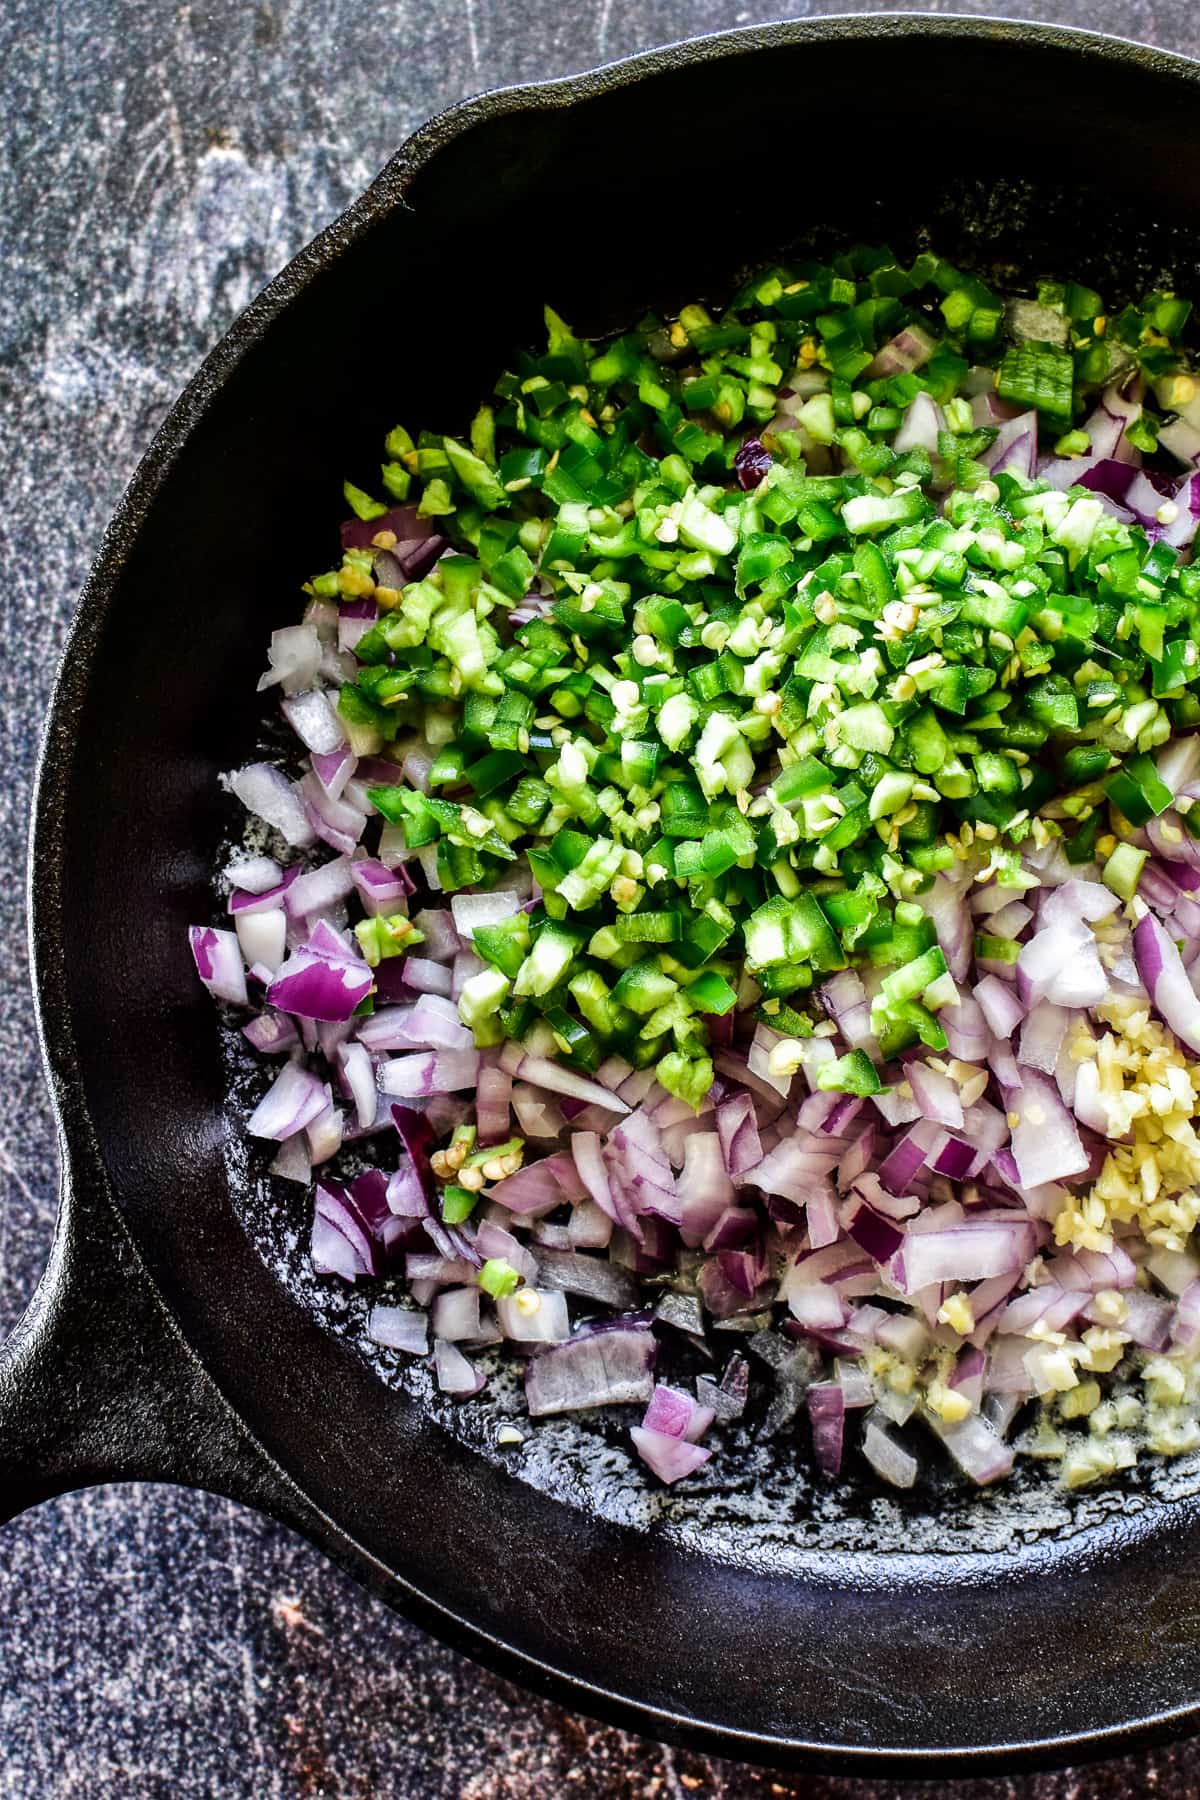 Red onion, garlic, and jalapeno in a cast iron skillet